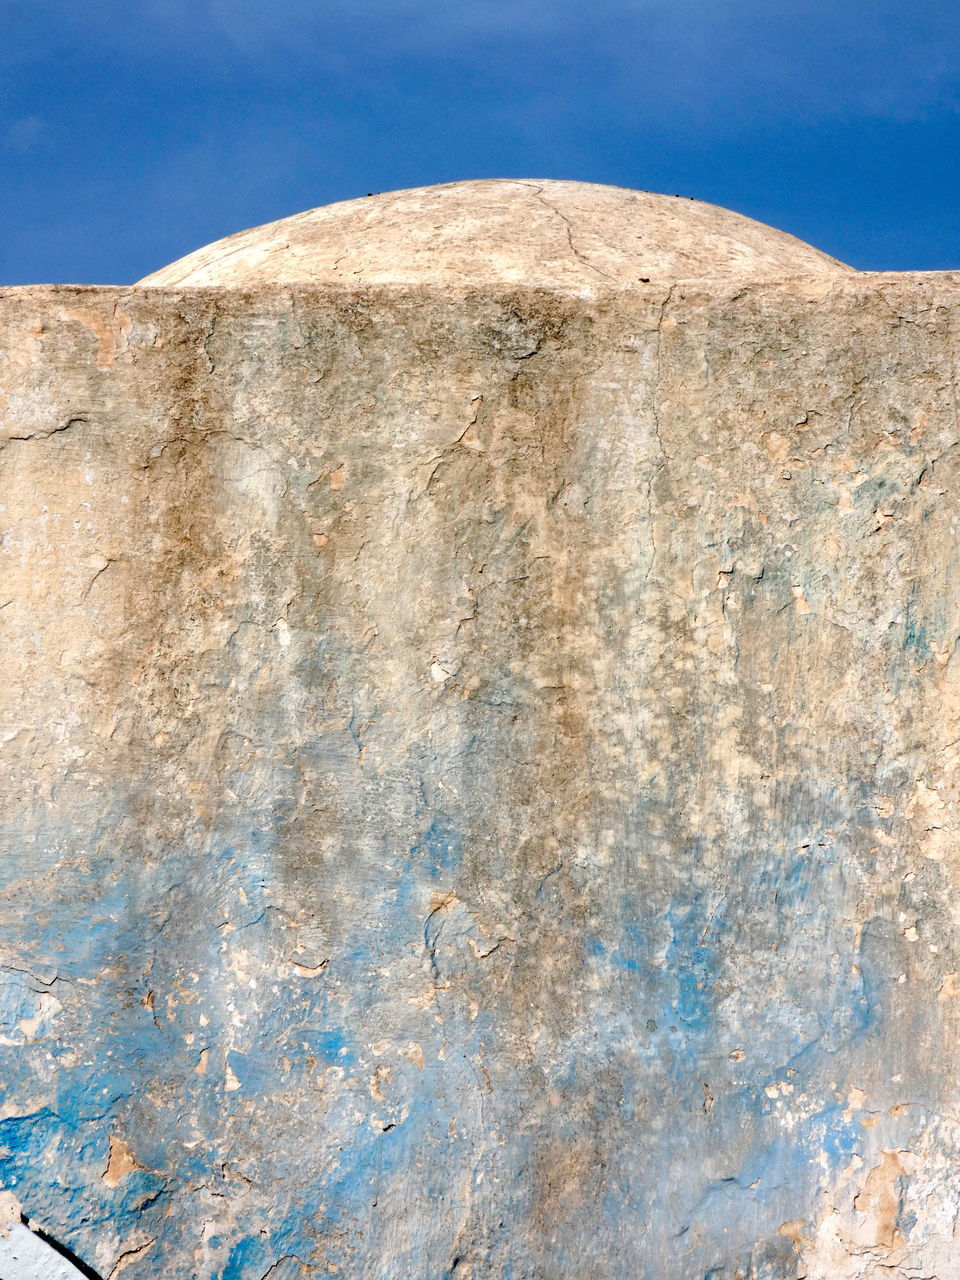 LOW ANGLE VIEW OF BLUE STONE WALL